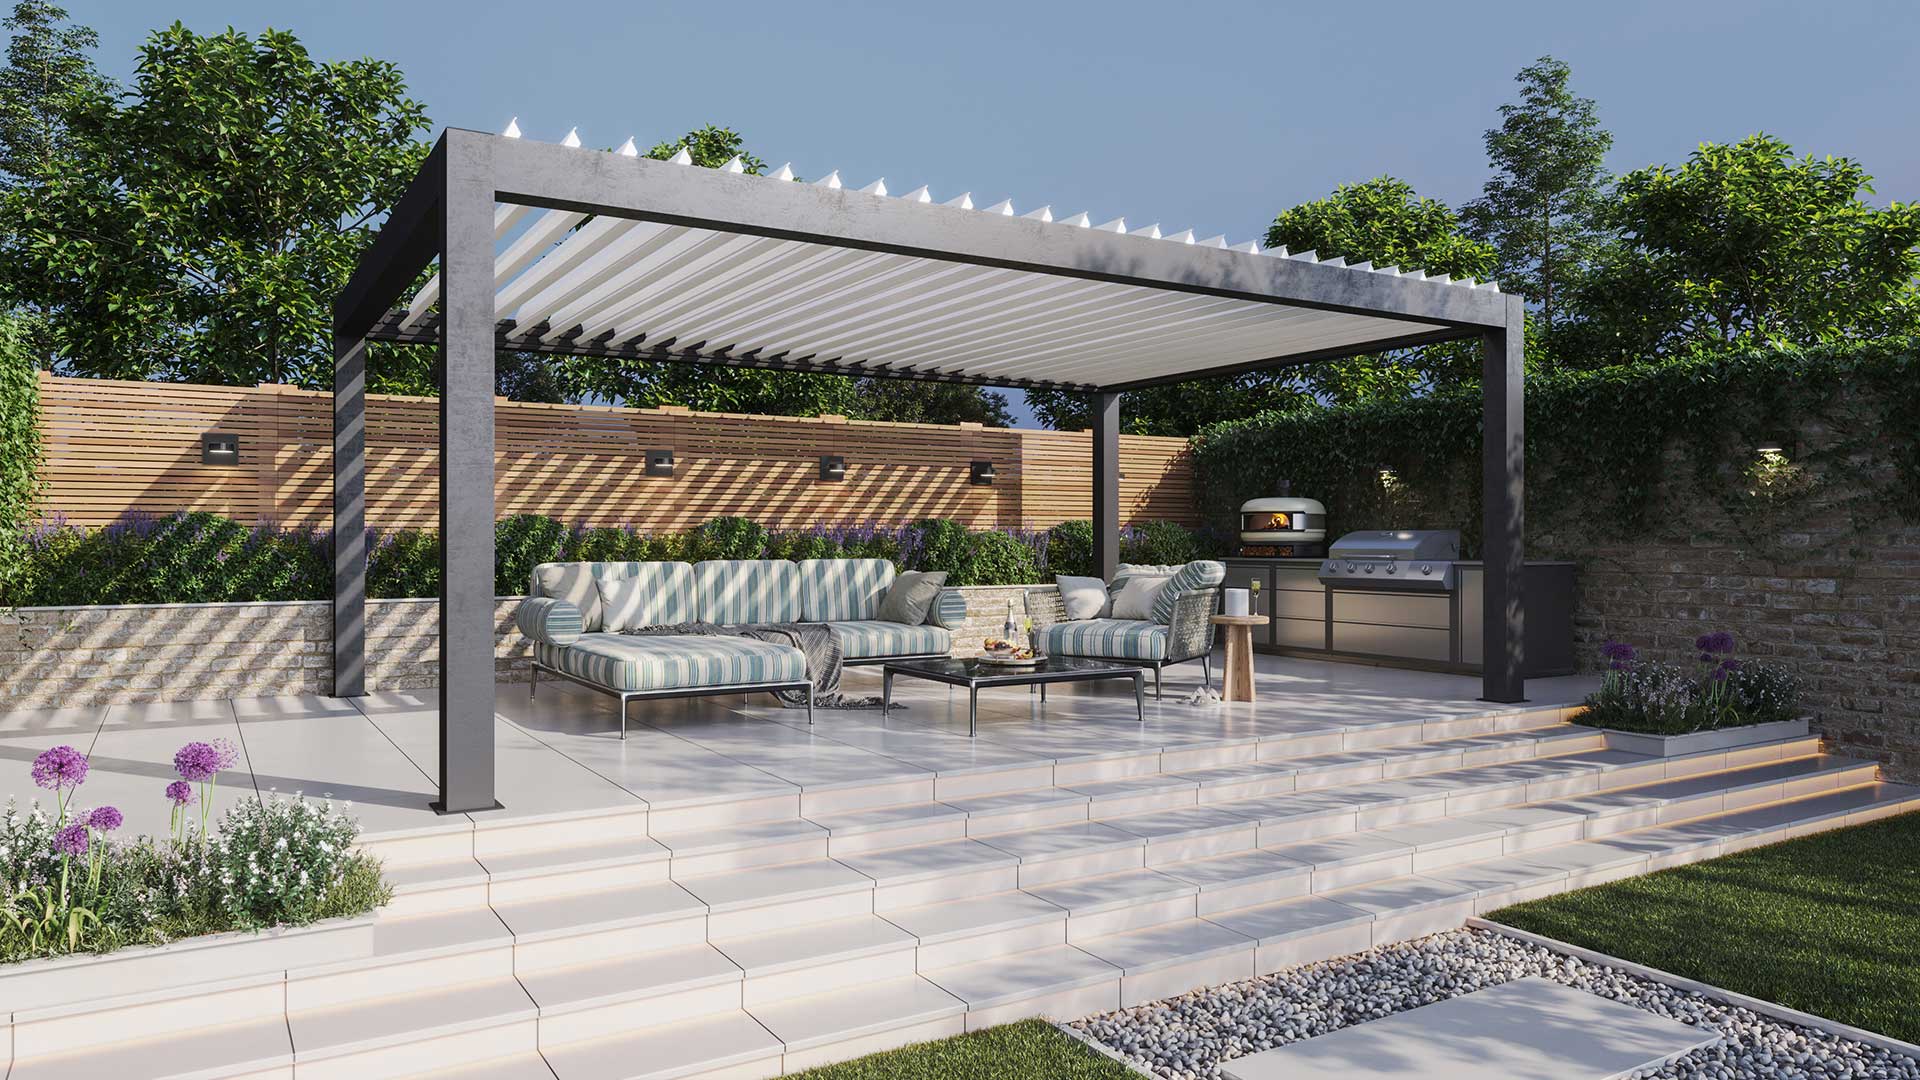 Pergola in Sun with roof shade